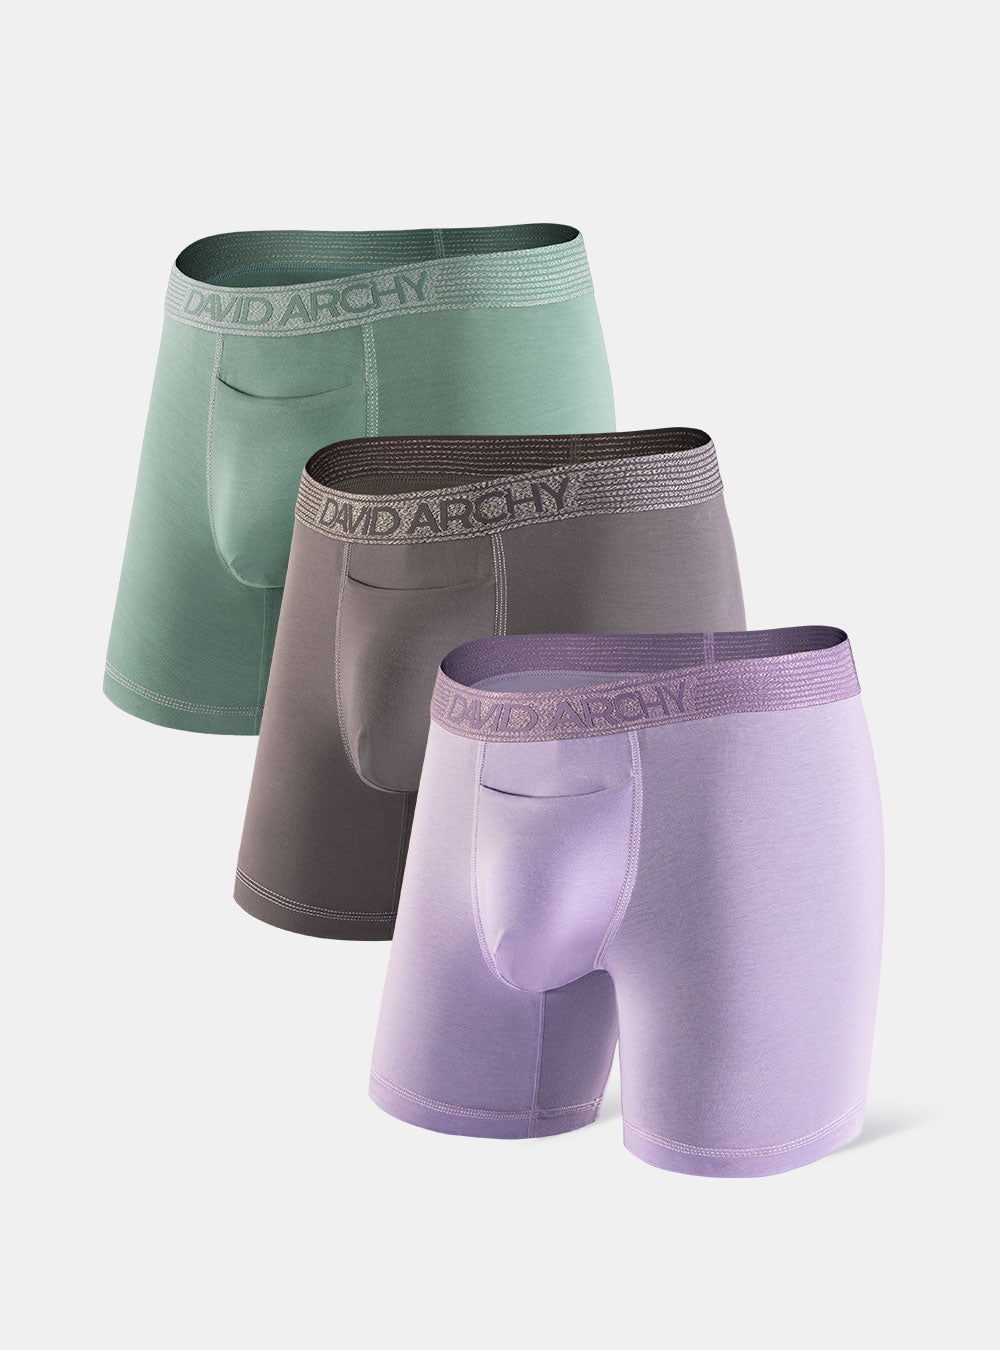 3 Packs Cotton Boxer Briefs with Fly